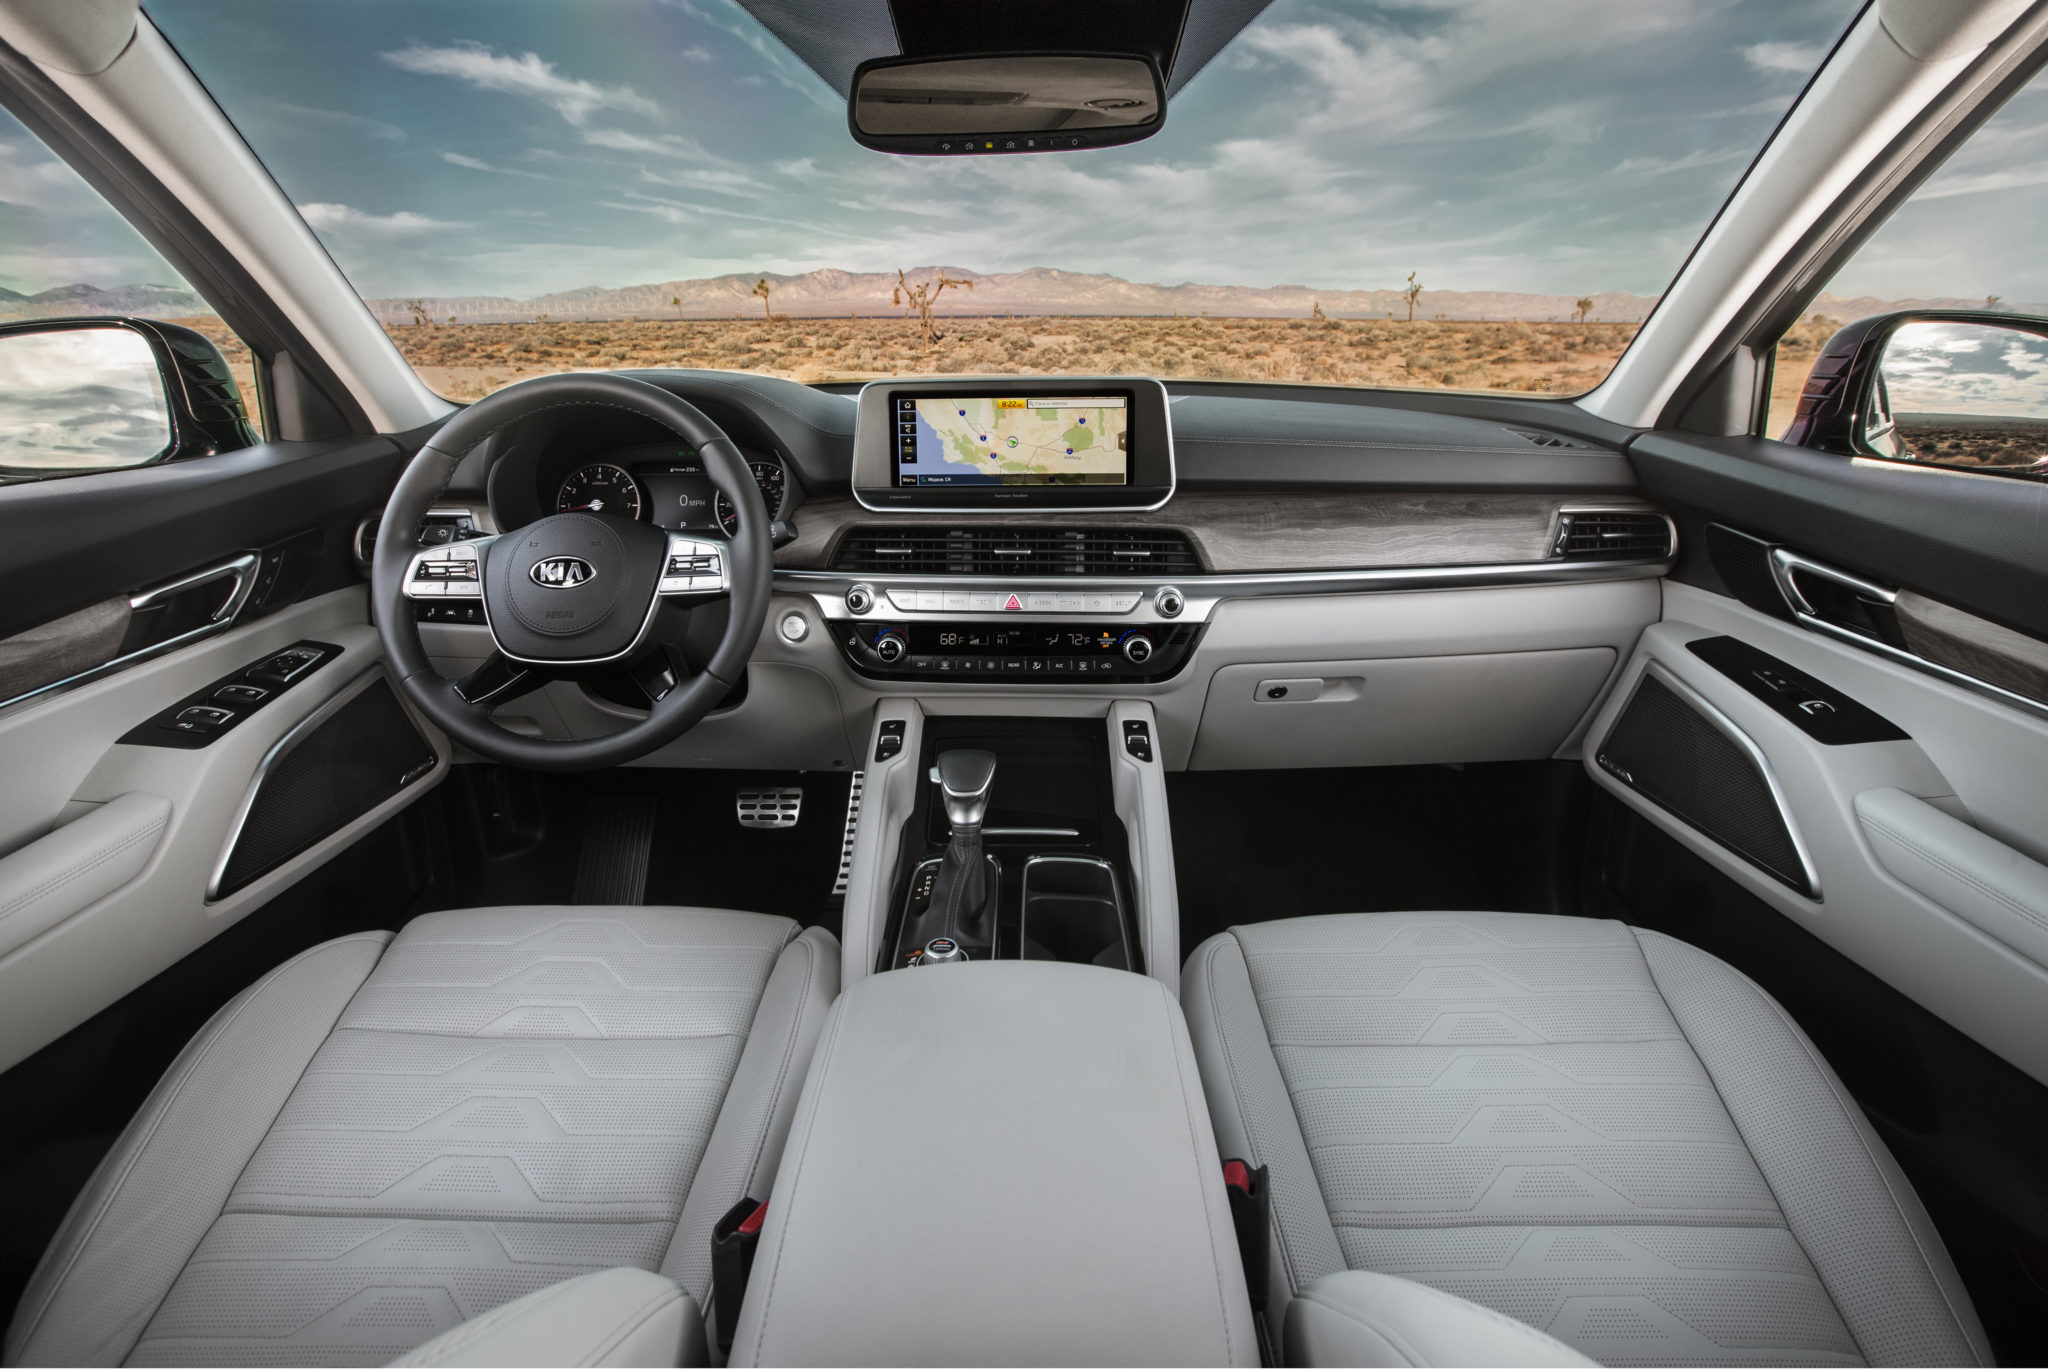 Kia Telluride Earns Recognition As One Of The Best Interiors For 2020